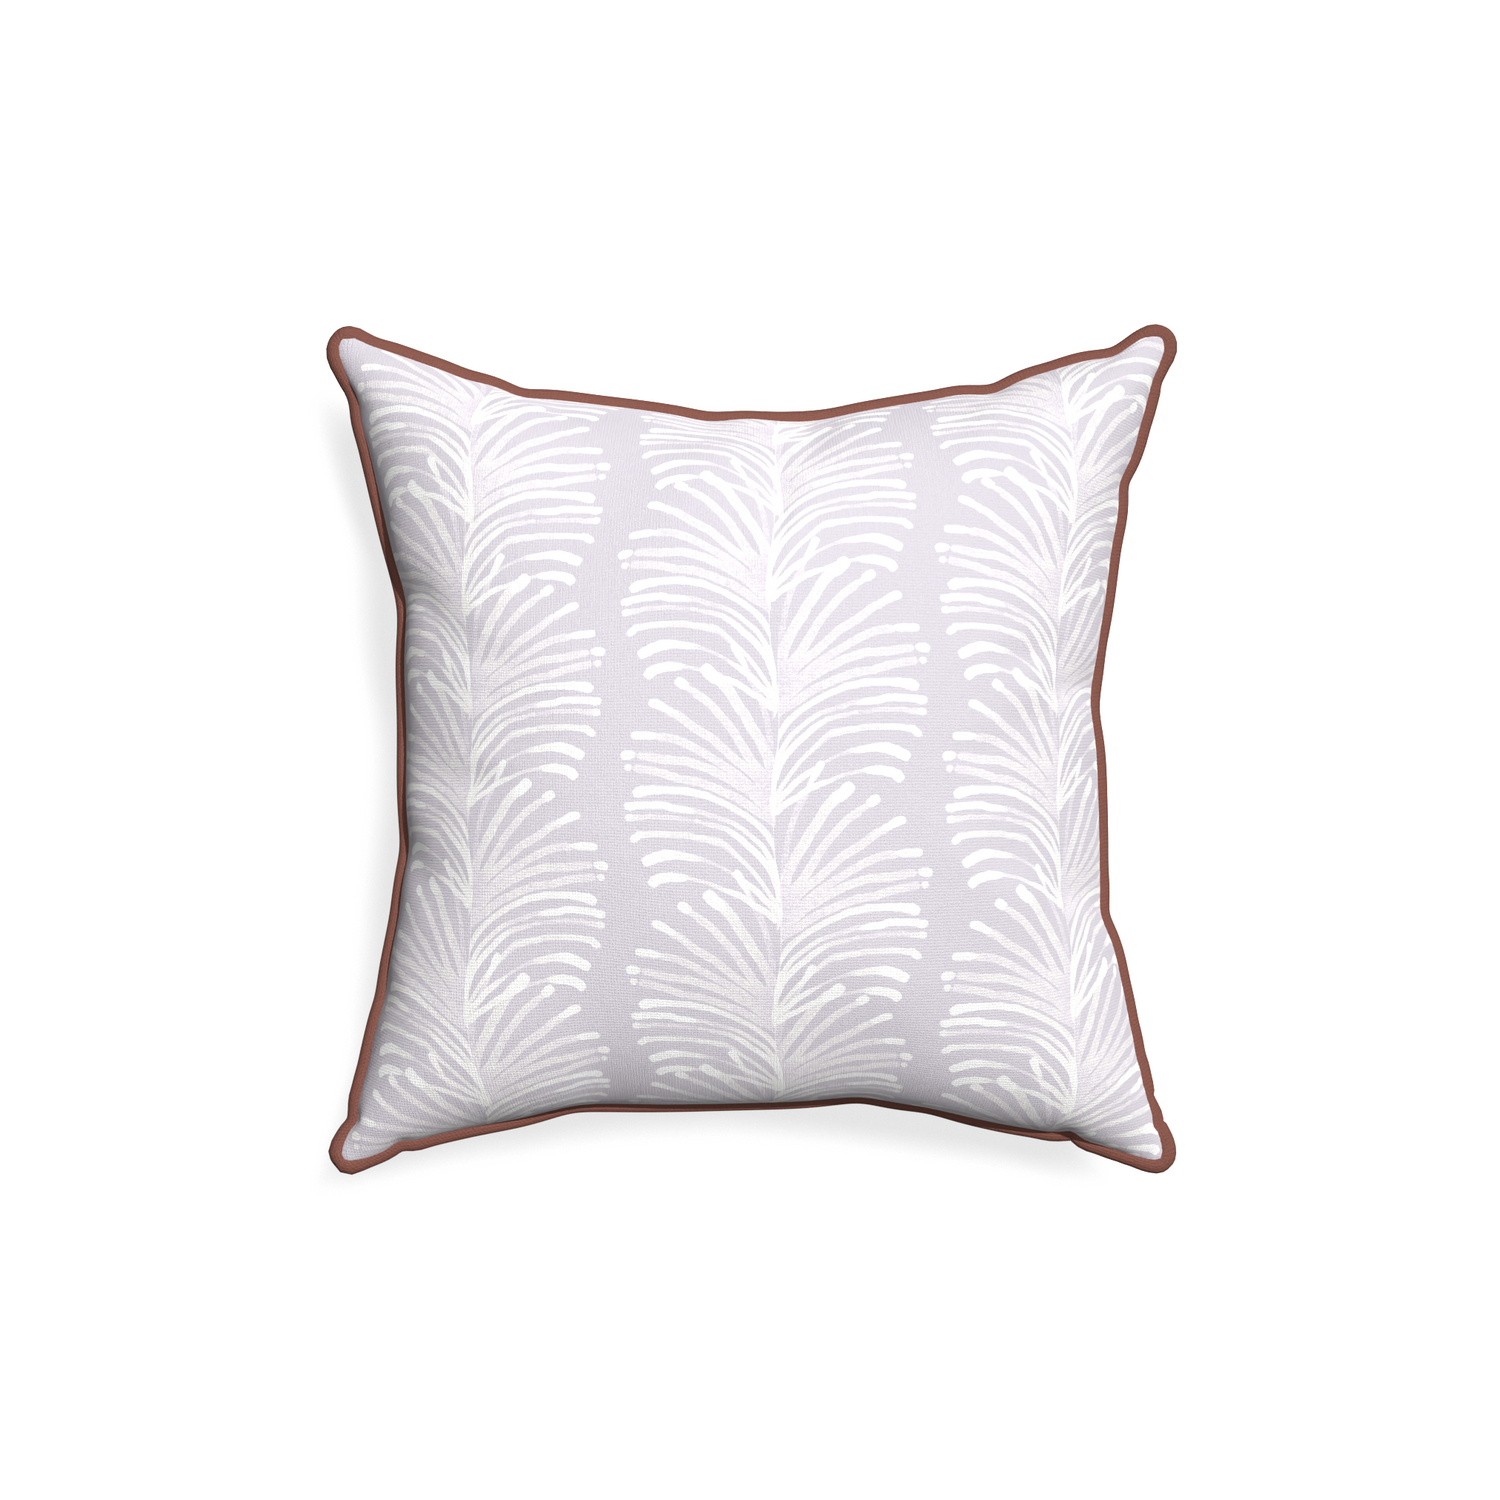 18-square emma lavender custom lavender botanical stripepillow with w piping on white background